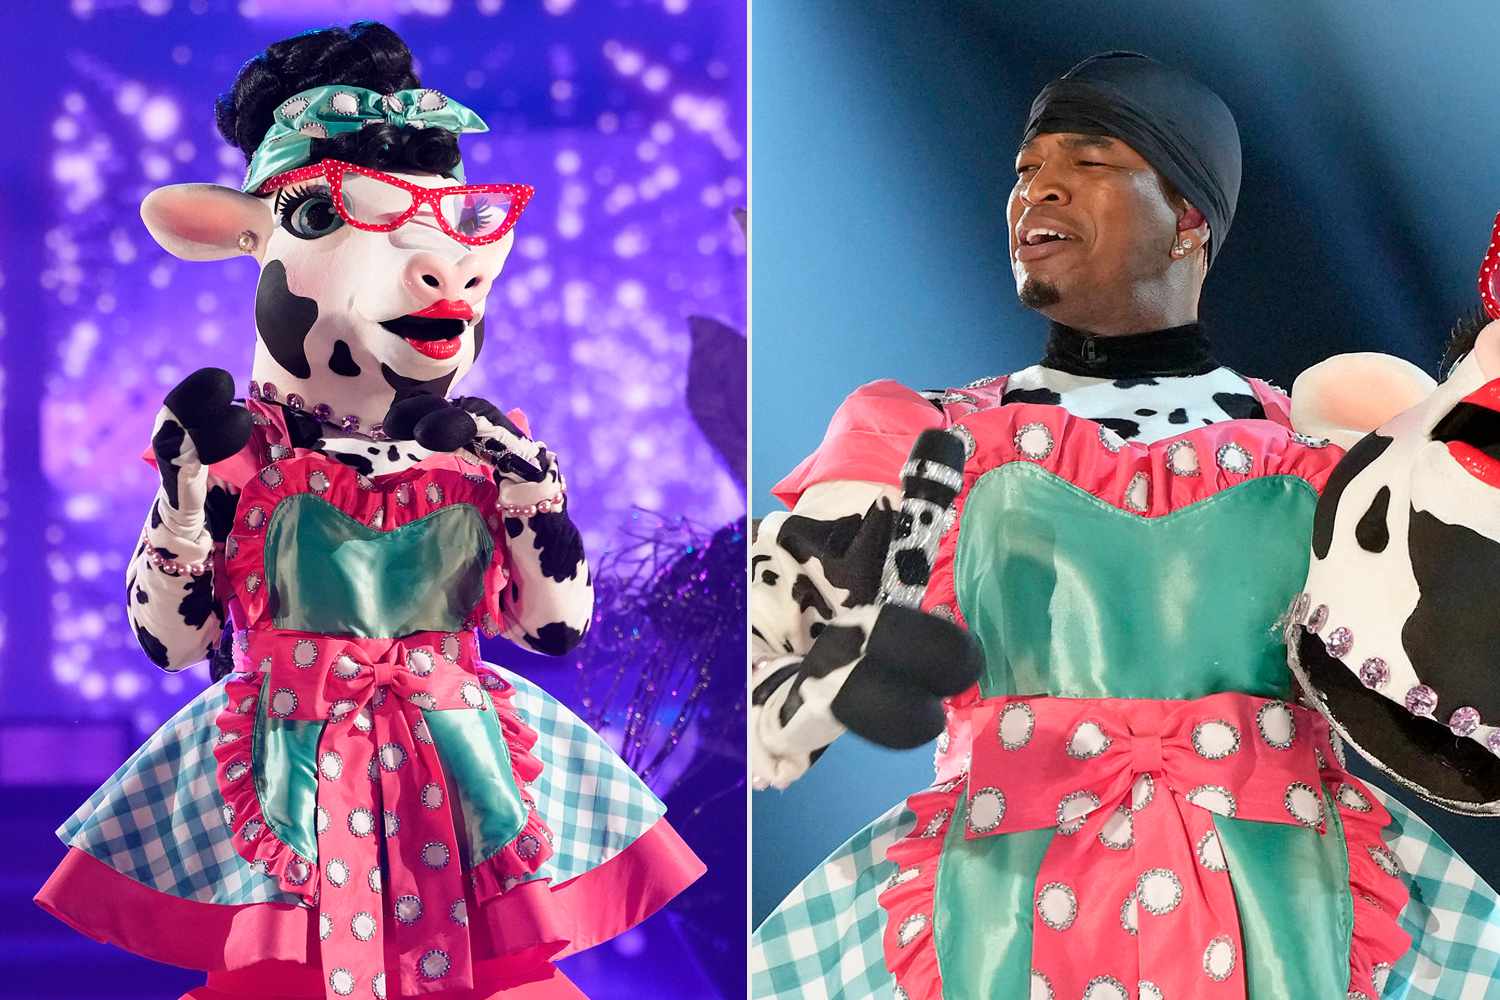 Cow in costume on 'The Masked Singer' // unmasked on show as Ne-Yo